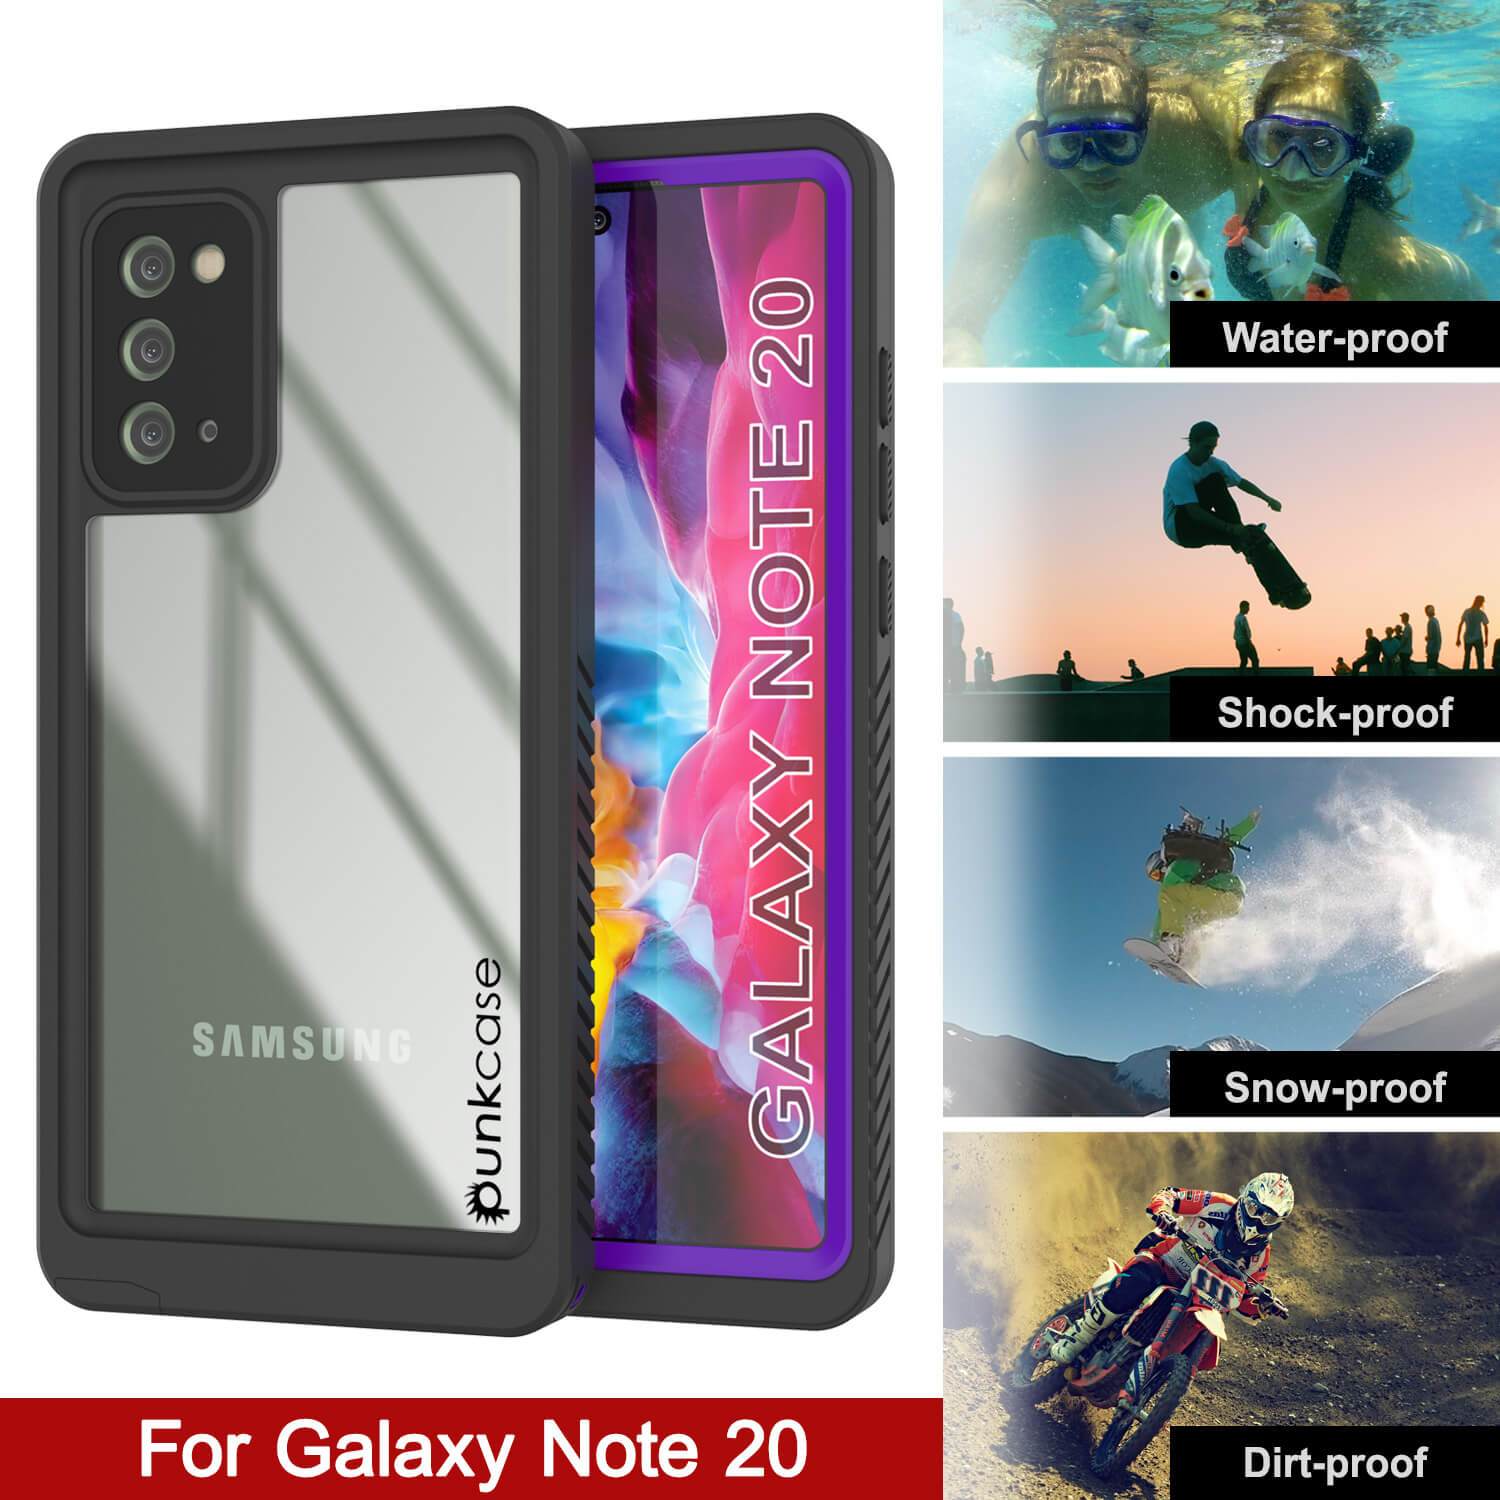 Galaxy Note 20 Case, Punkcase [Extreme Series] Armor Cover W/ Built In Screen Protector [Purple]